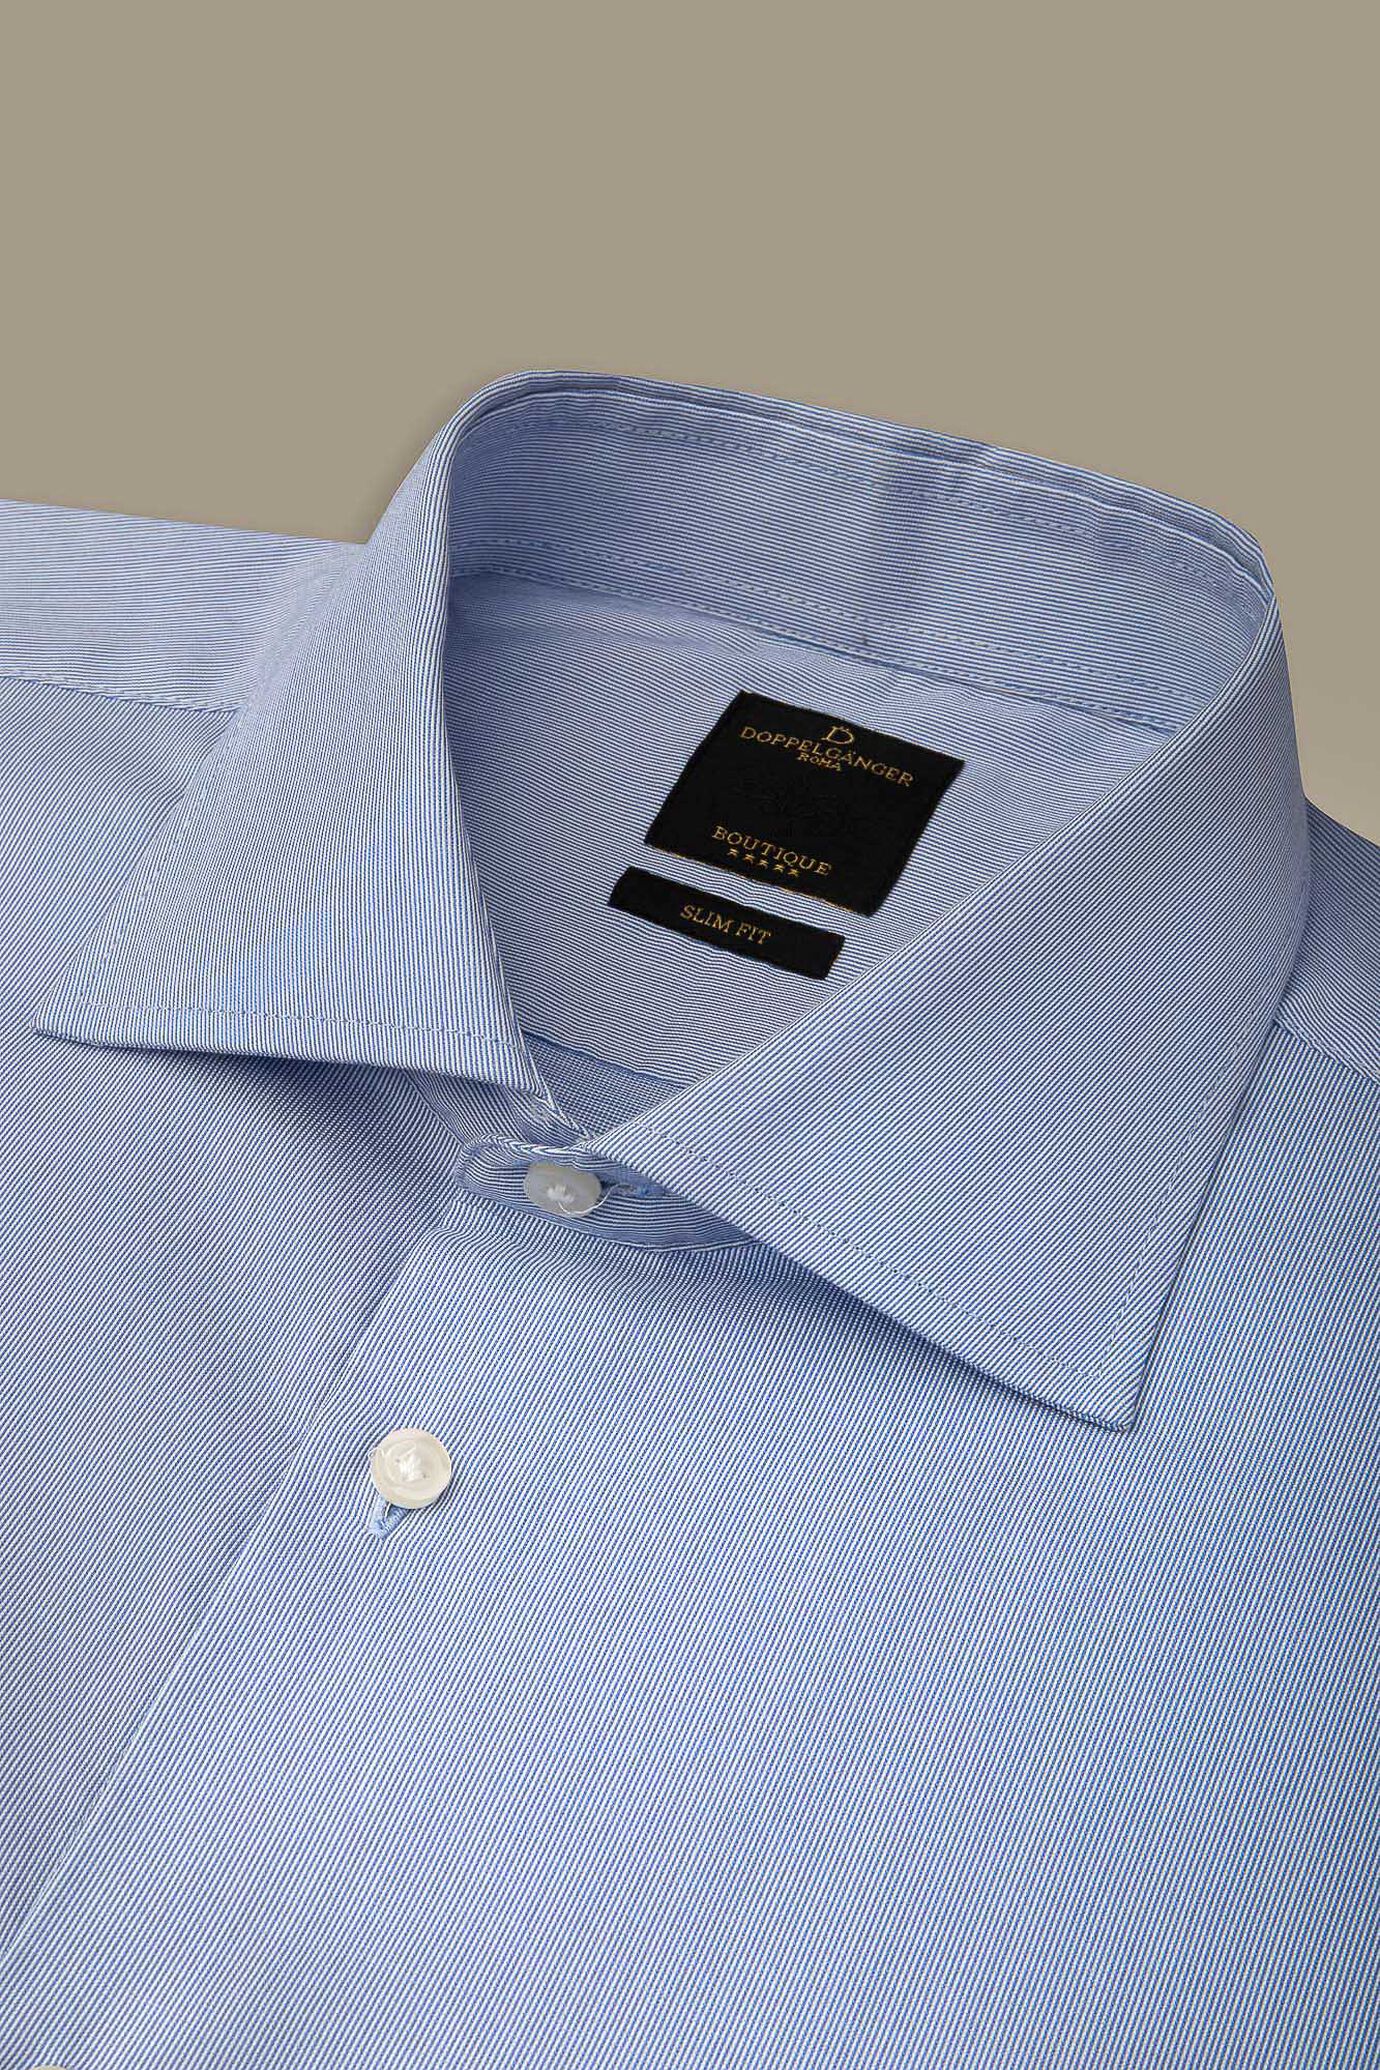 French collar classic shirt with dobby stripes image number 1